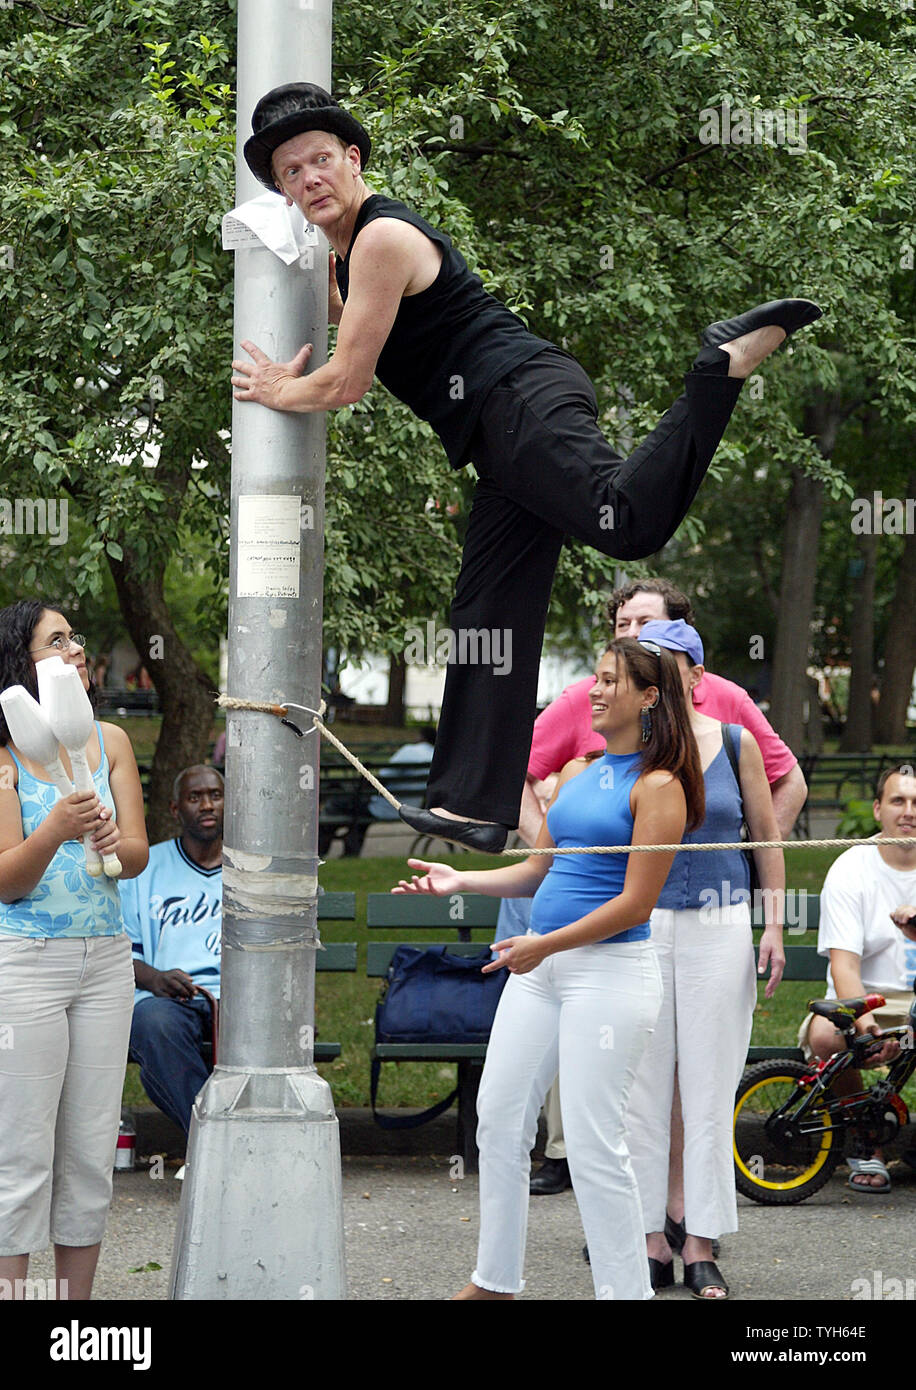 French aerialist Philippe Petit performs in Washington Square Park in New York on July 30, 2005.  The performance is part of the commemoration of the anniversary of his 1974 tightrope walk between the World Trade Center towers.   (UPI Photo/Laura Cavanaugh) Stock Photo